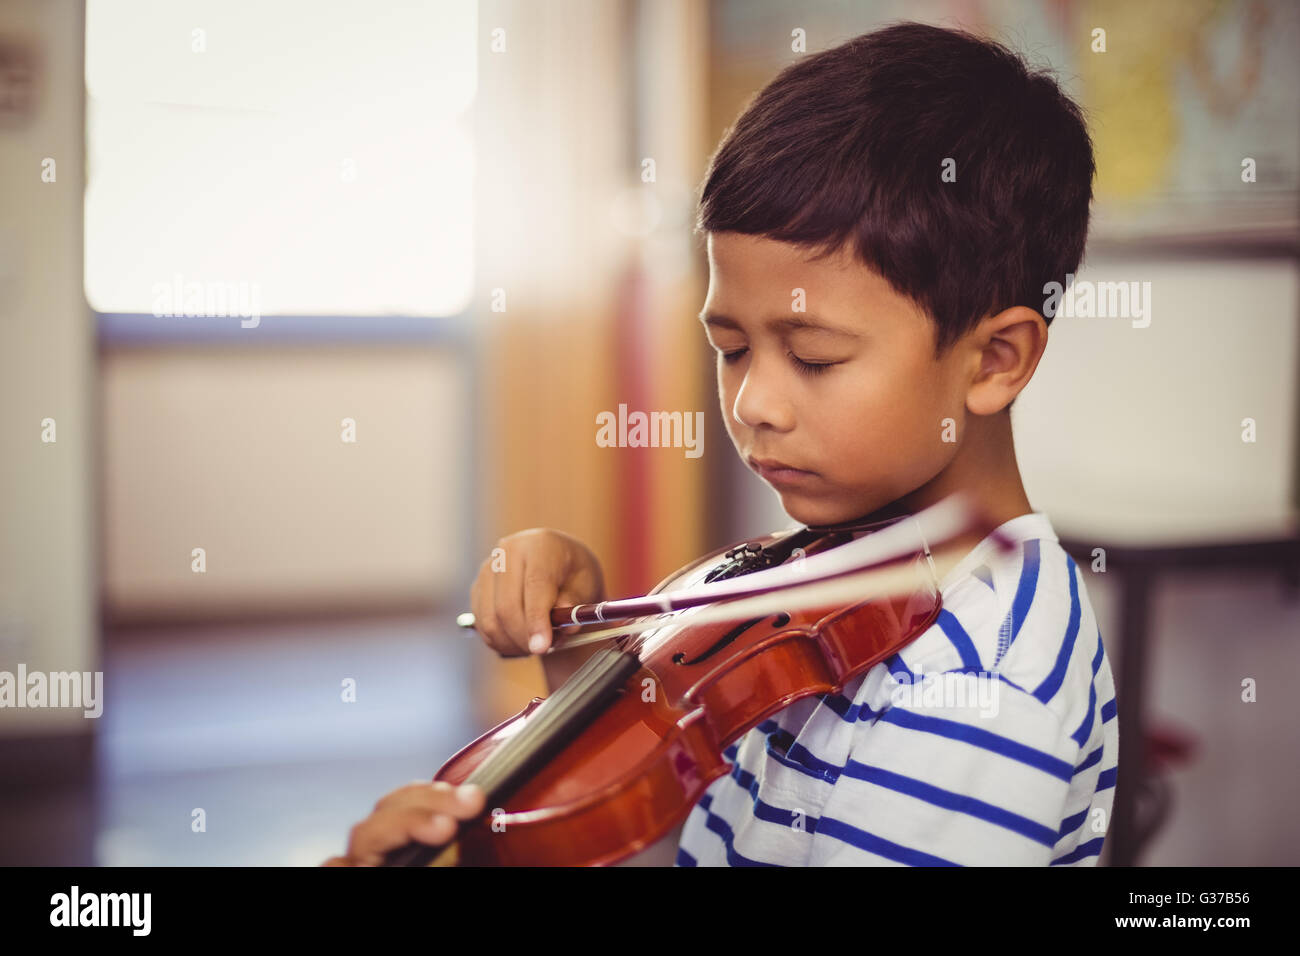 Schoolboy playing violin in classroom Stock Photo